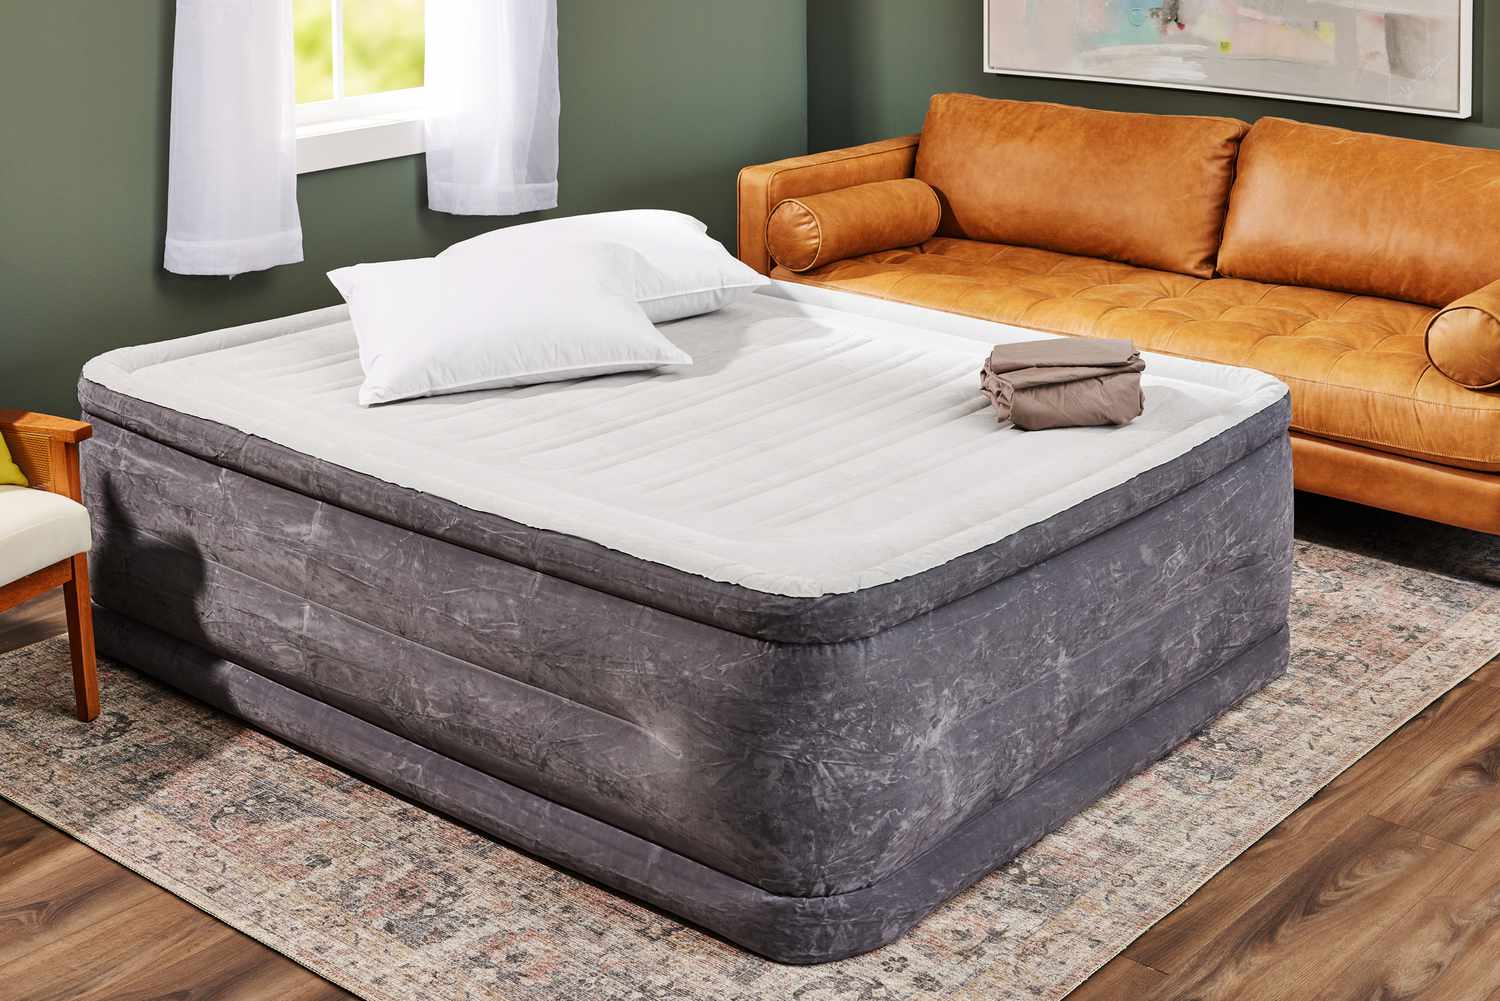 The INTEX 64417ED Dura-Beam Deluxe Comfort-Plush High-Rise Air Mattress fully inflated